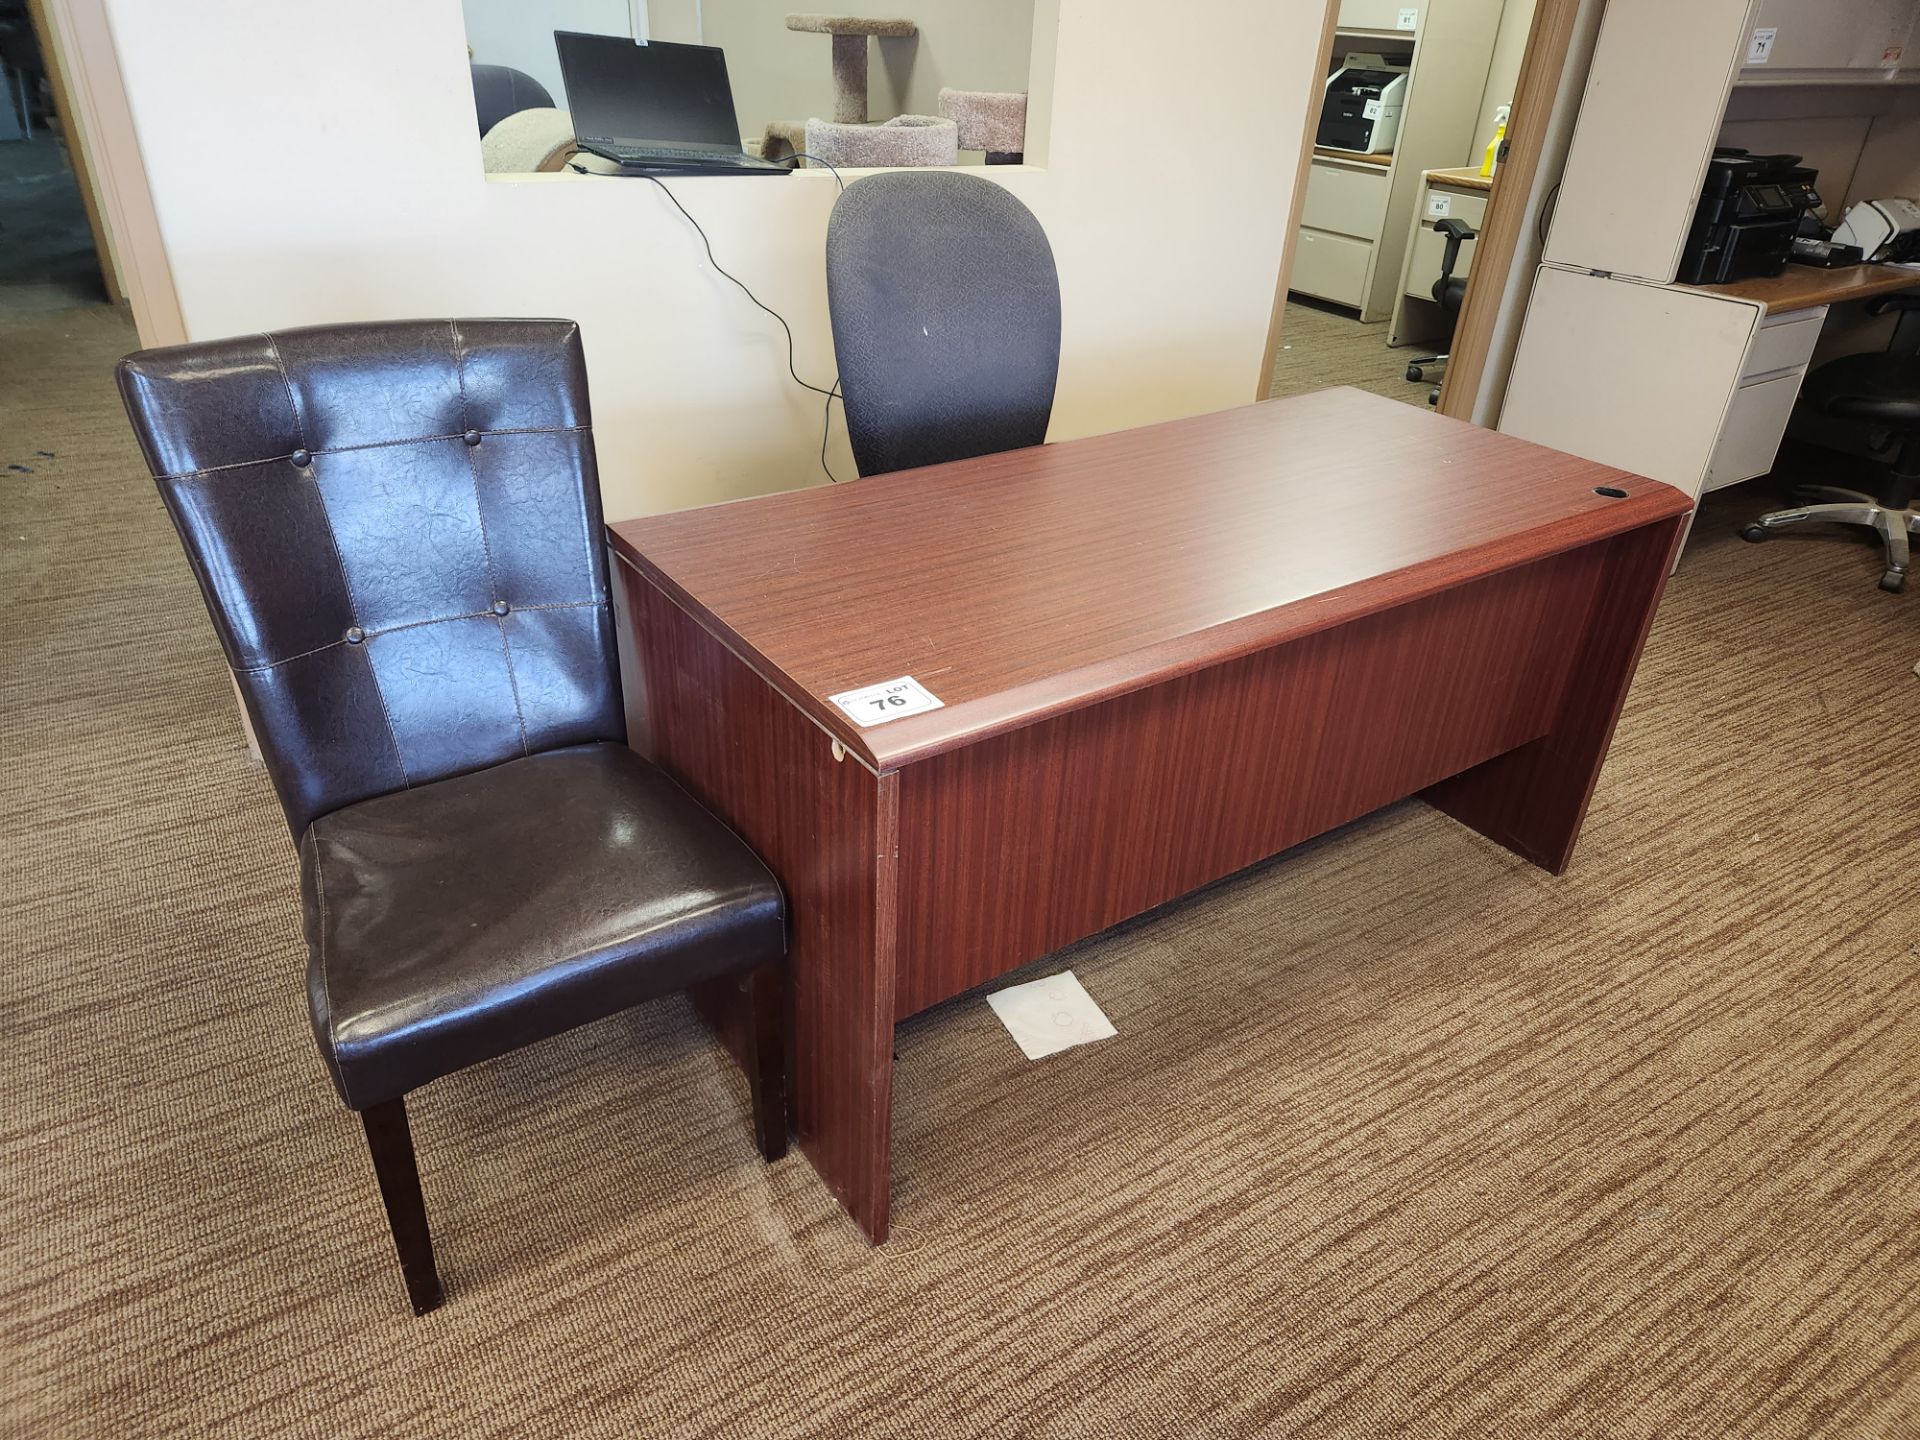 60" Desk with Chairs